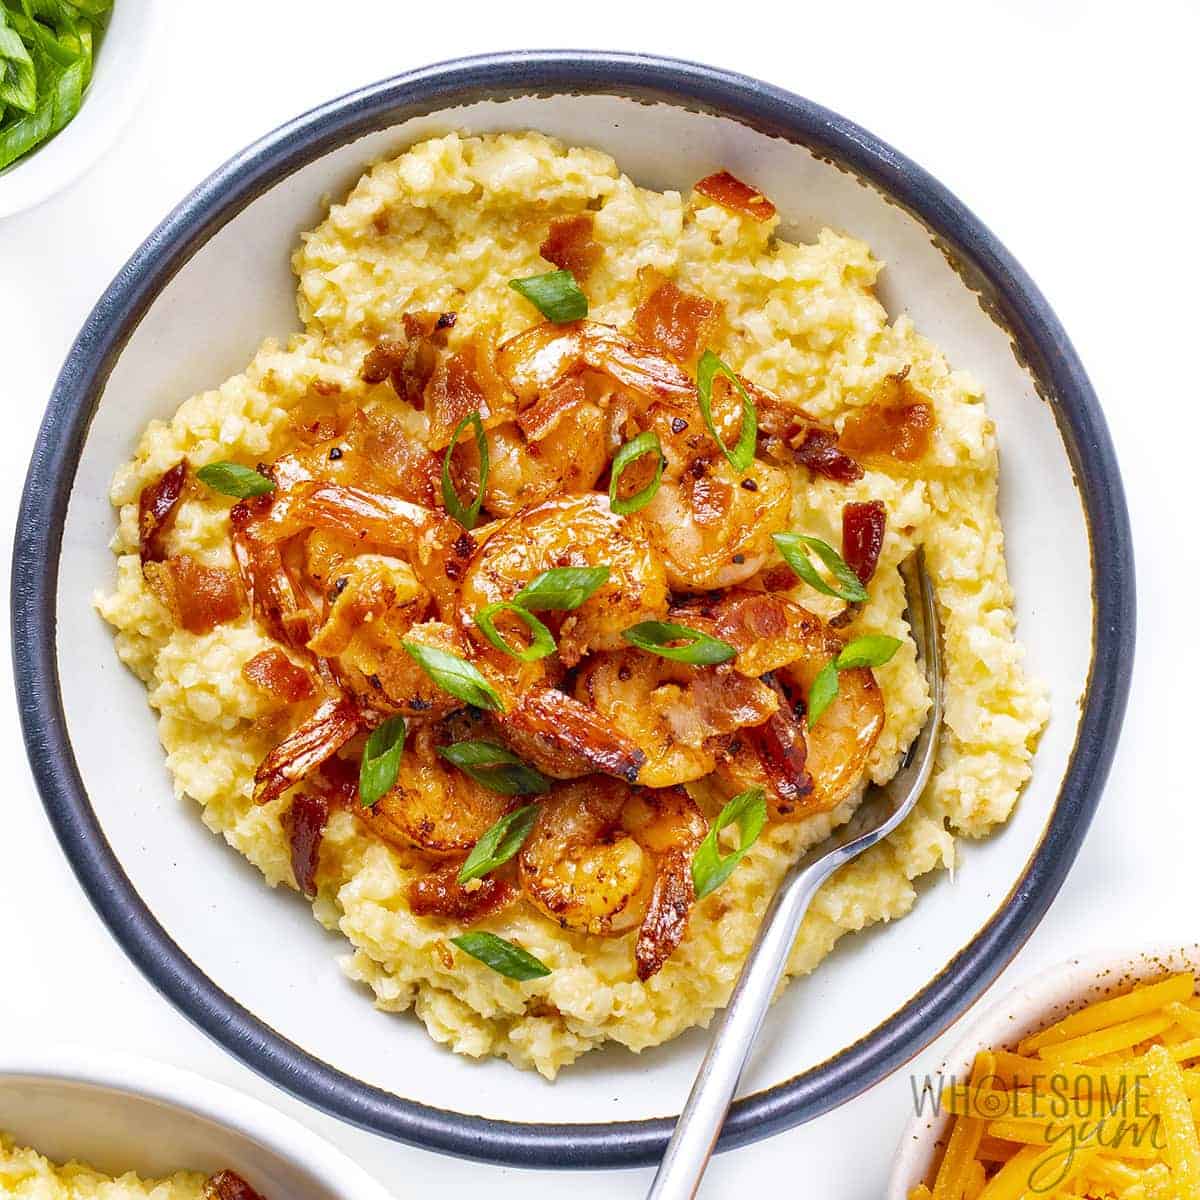 Cauliflower grits and shrimp in a bowl with spoon